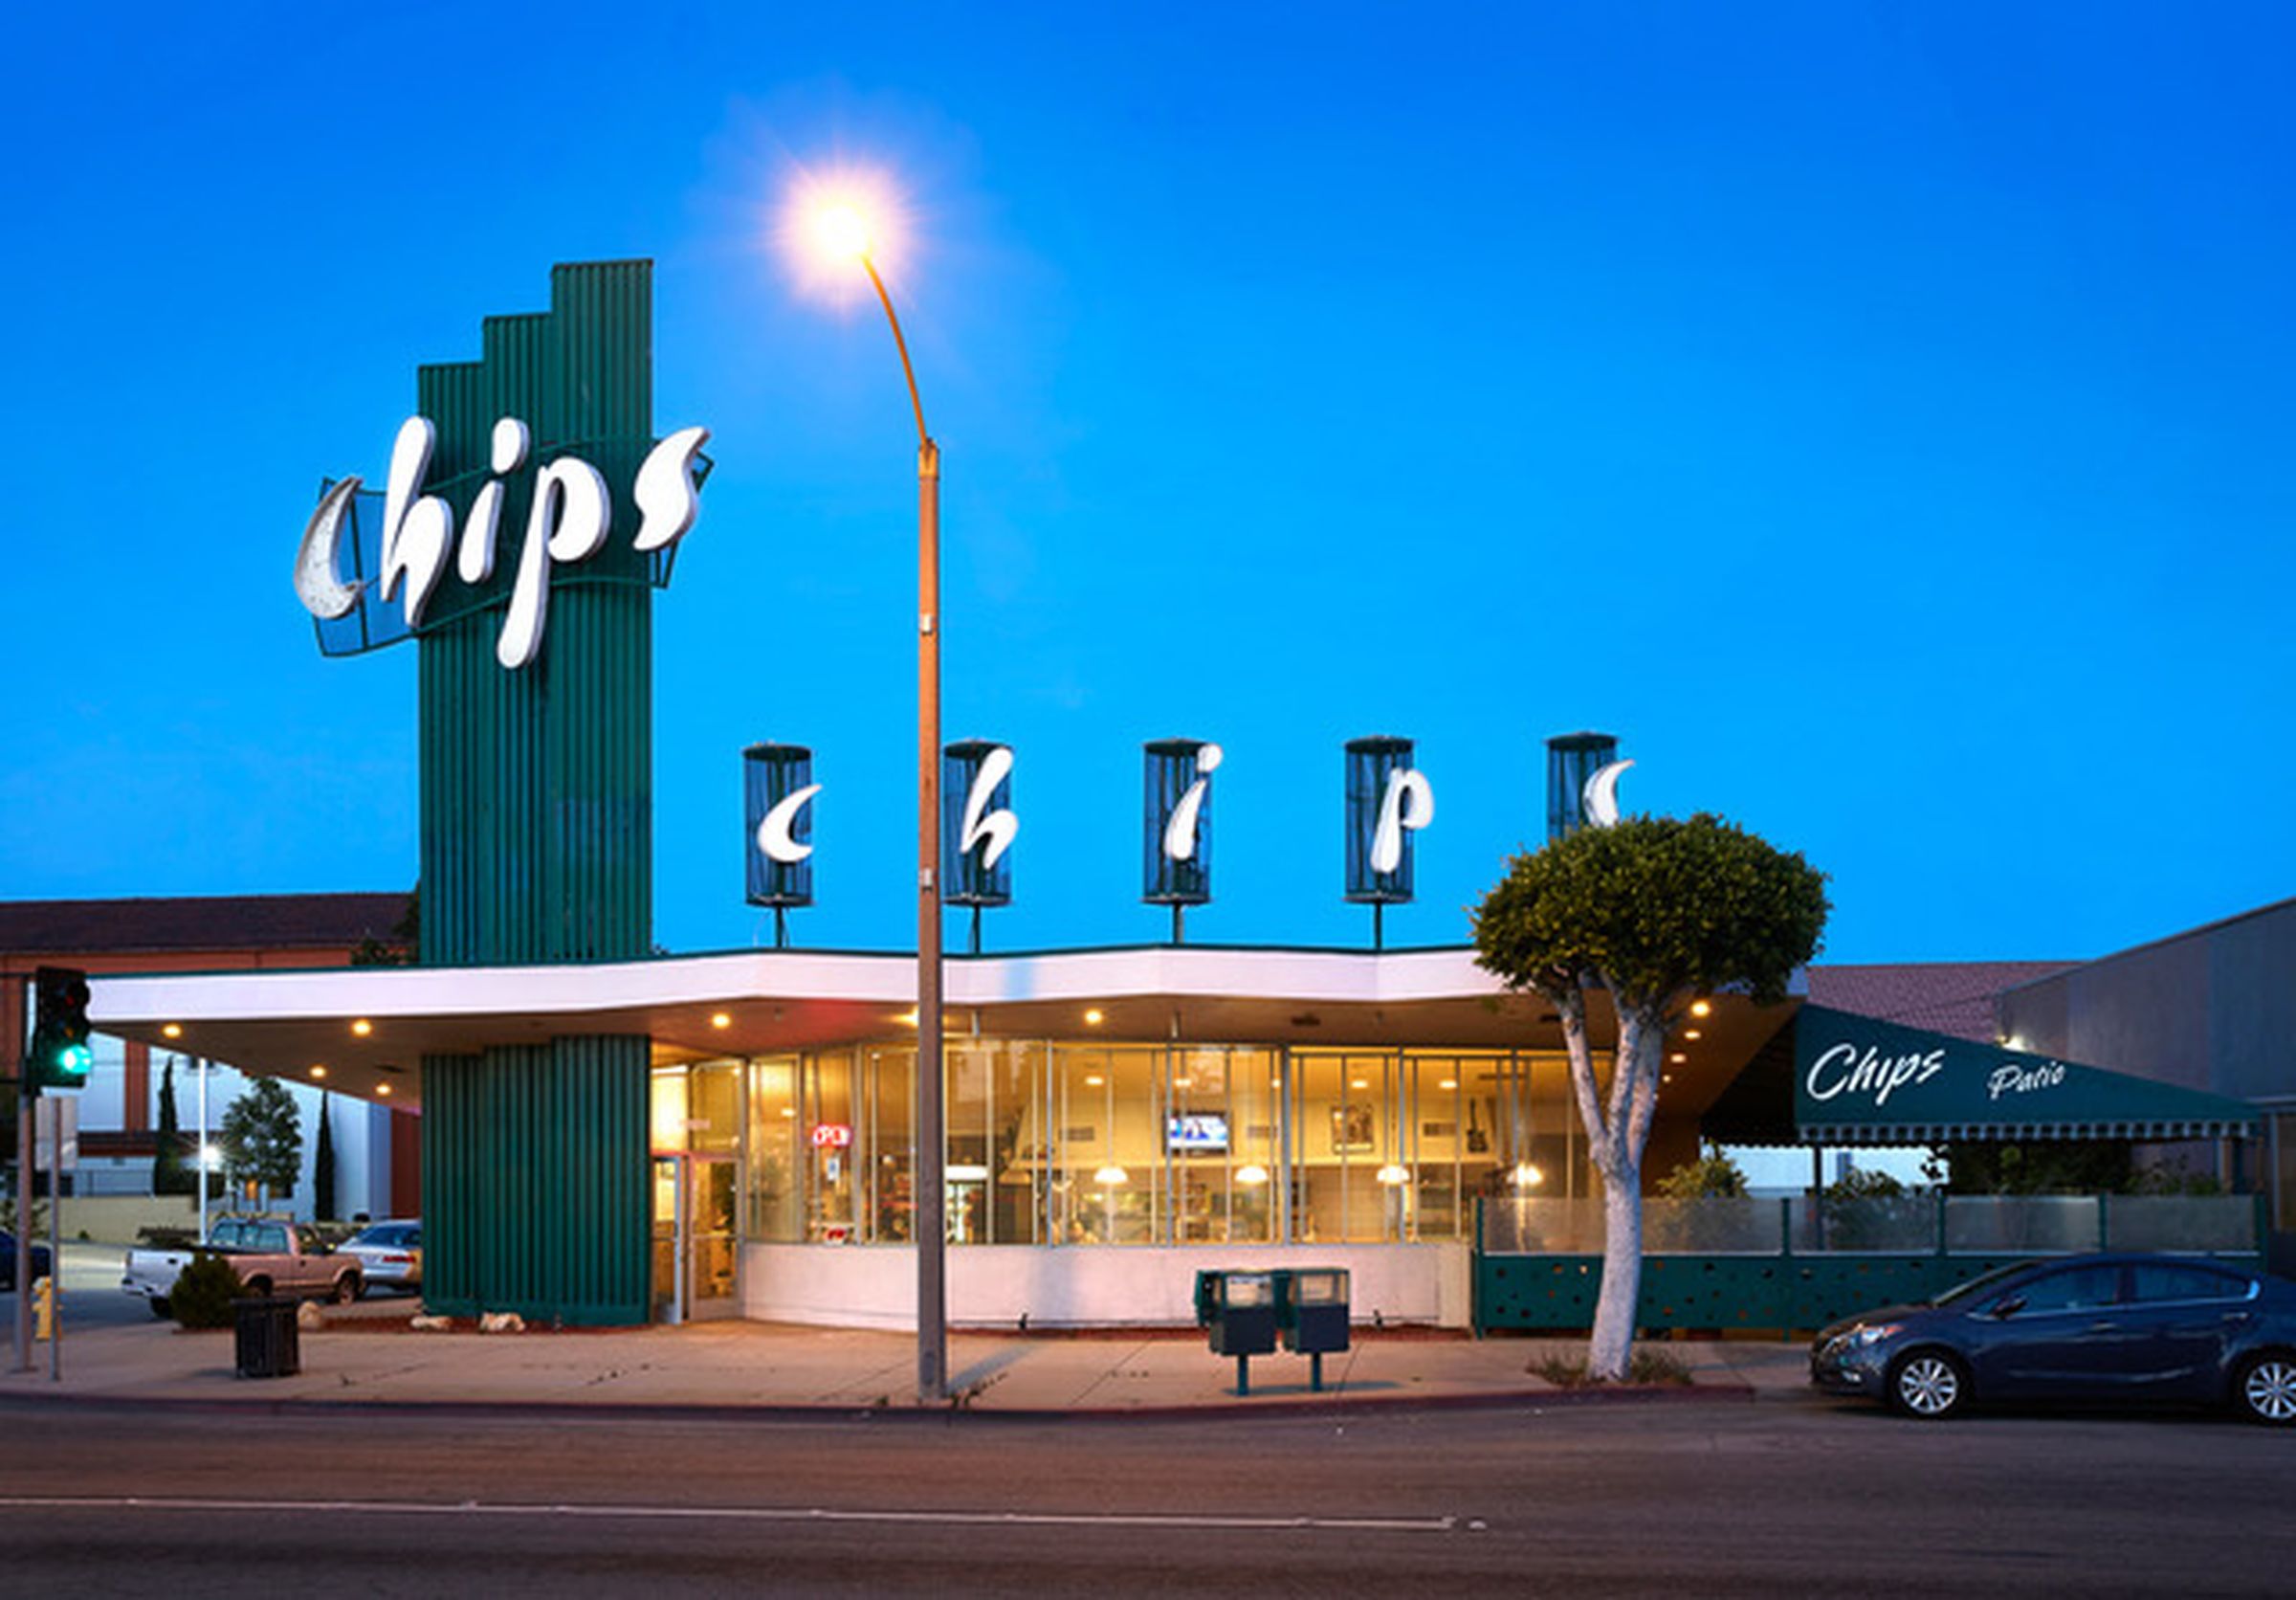 Image of Chips Restaurant: Mid century diner with the word "CHIPS" across the top. The sky surrounding the diner is dim, there is a bright street light in front of the building. The lights inside of the building are all turned on.